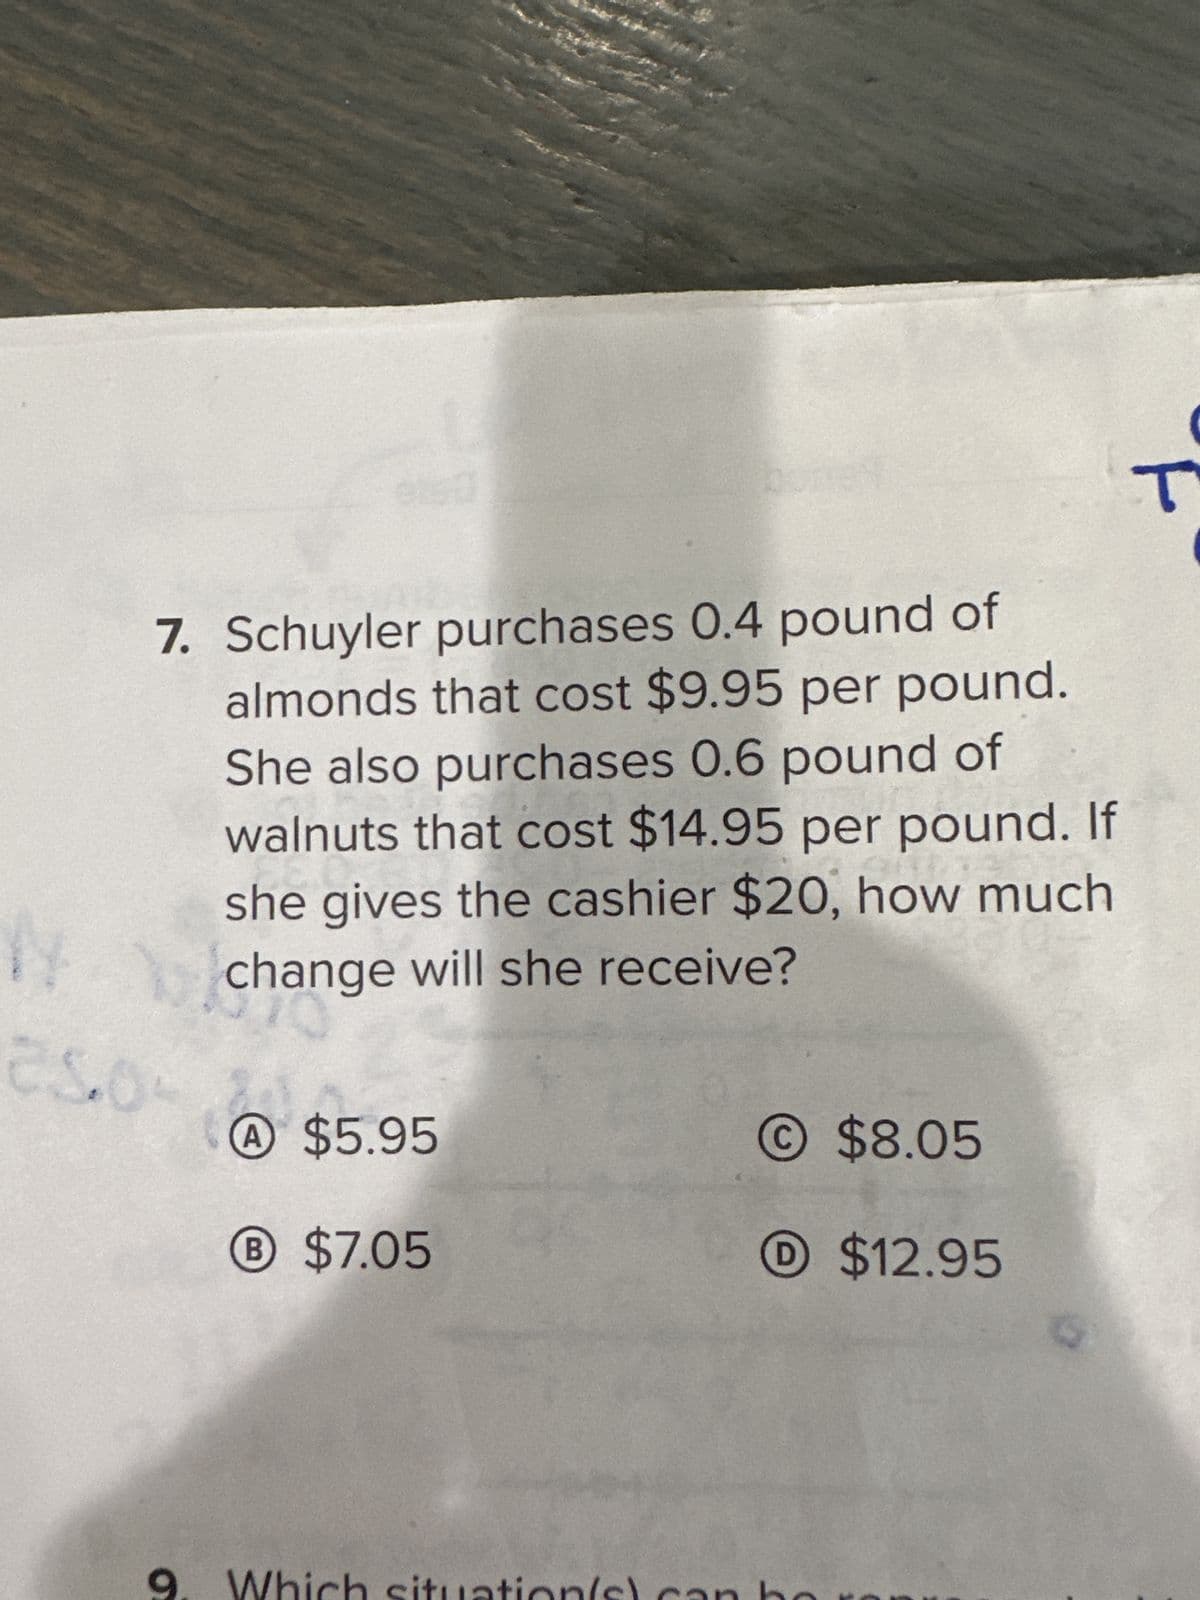 7. Schuyler purchases 0.4 pound of
almonds that cost $9.95 per pound.
She also purchases 0.6 pound of
walnuts that cost $14.95 per pound. If
she gives the cashier $20, how much
change will she receive?
بالامان
O
A $5.95
B
® $7.05
situation(s)
$8.05
D$12.95